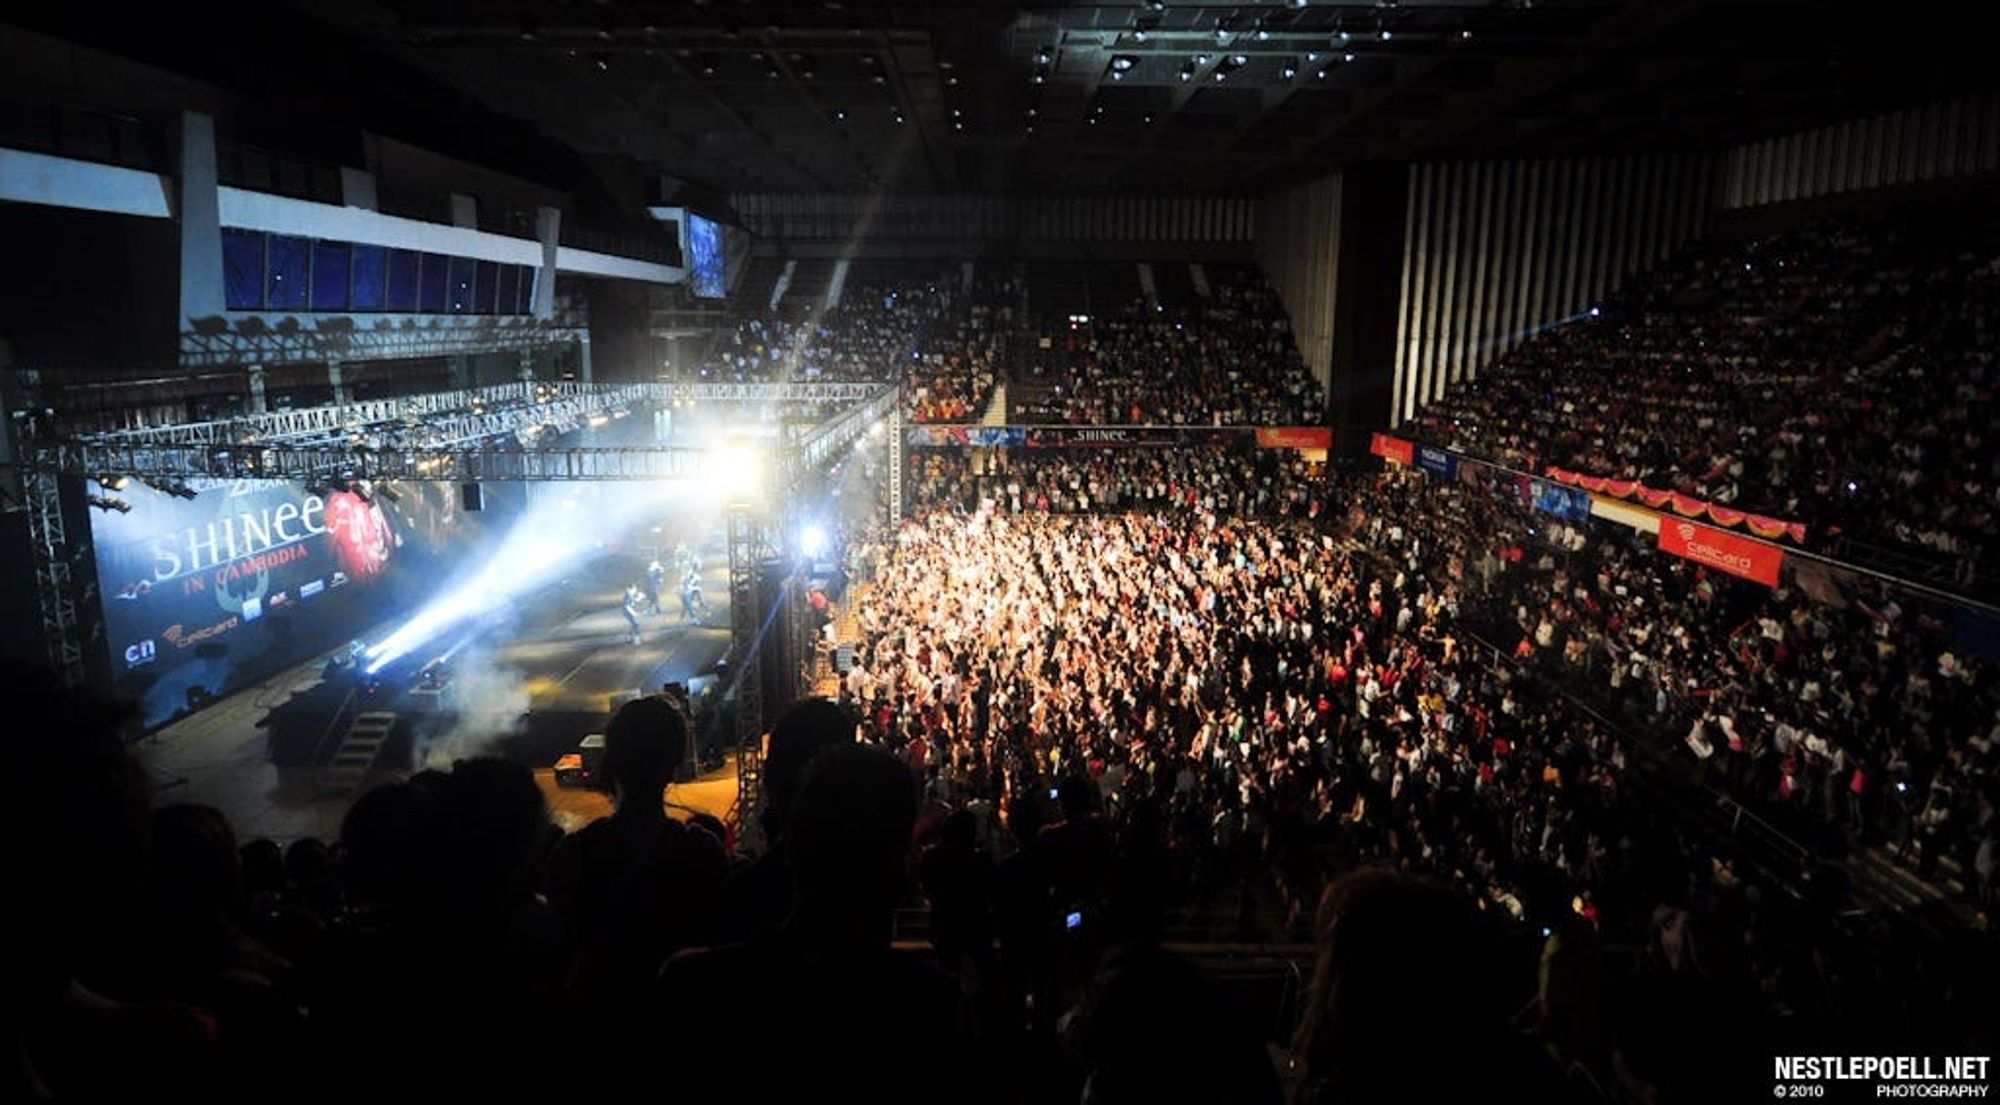 Massive K-Pop concerts have become common all over the world. (Nestlepoell.net)